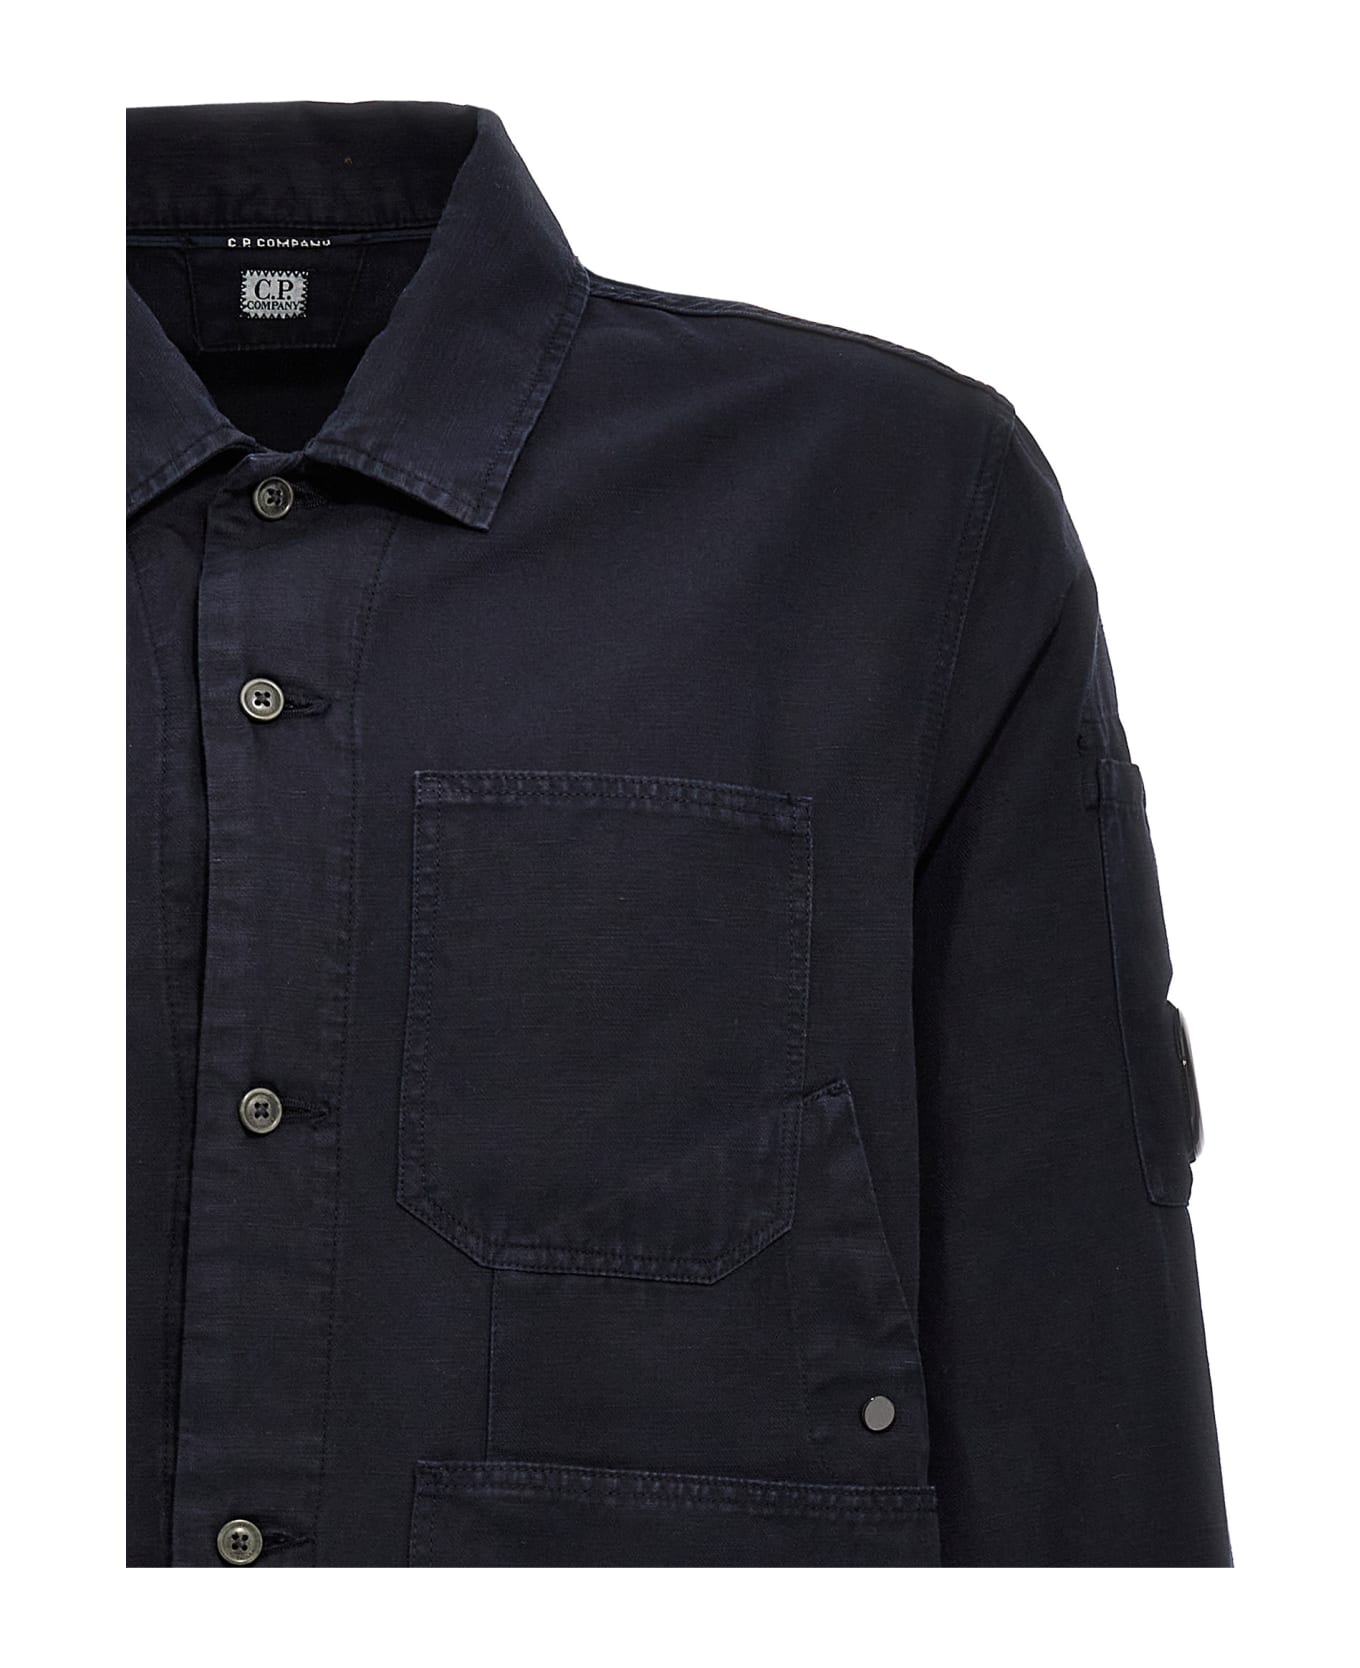 C.P. Company Overlapping Pocket Overshirt - Total Eclipse シャツ